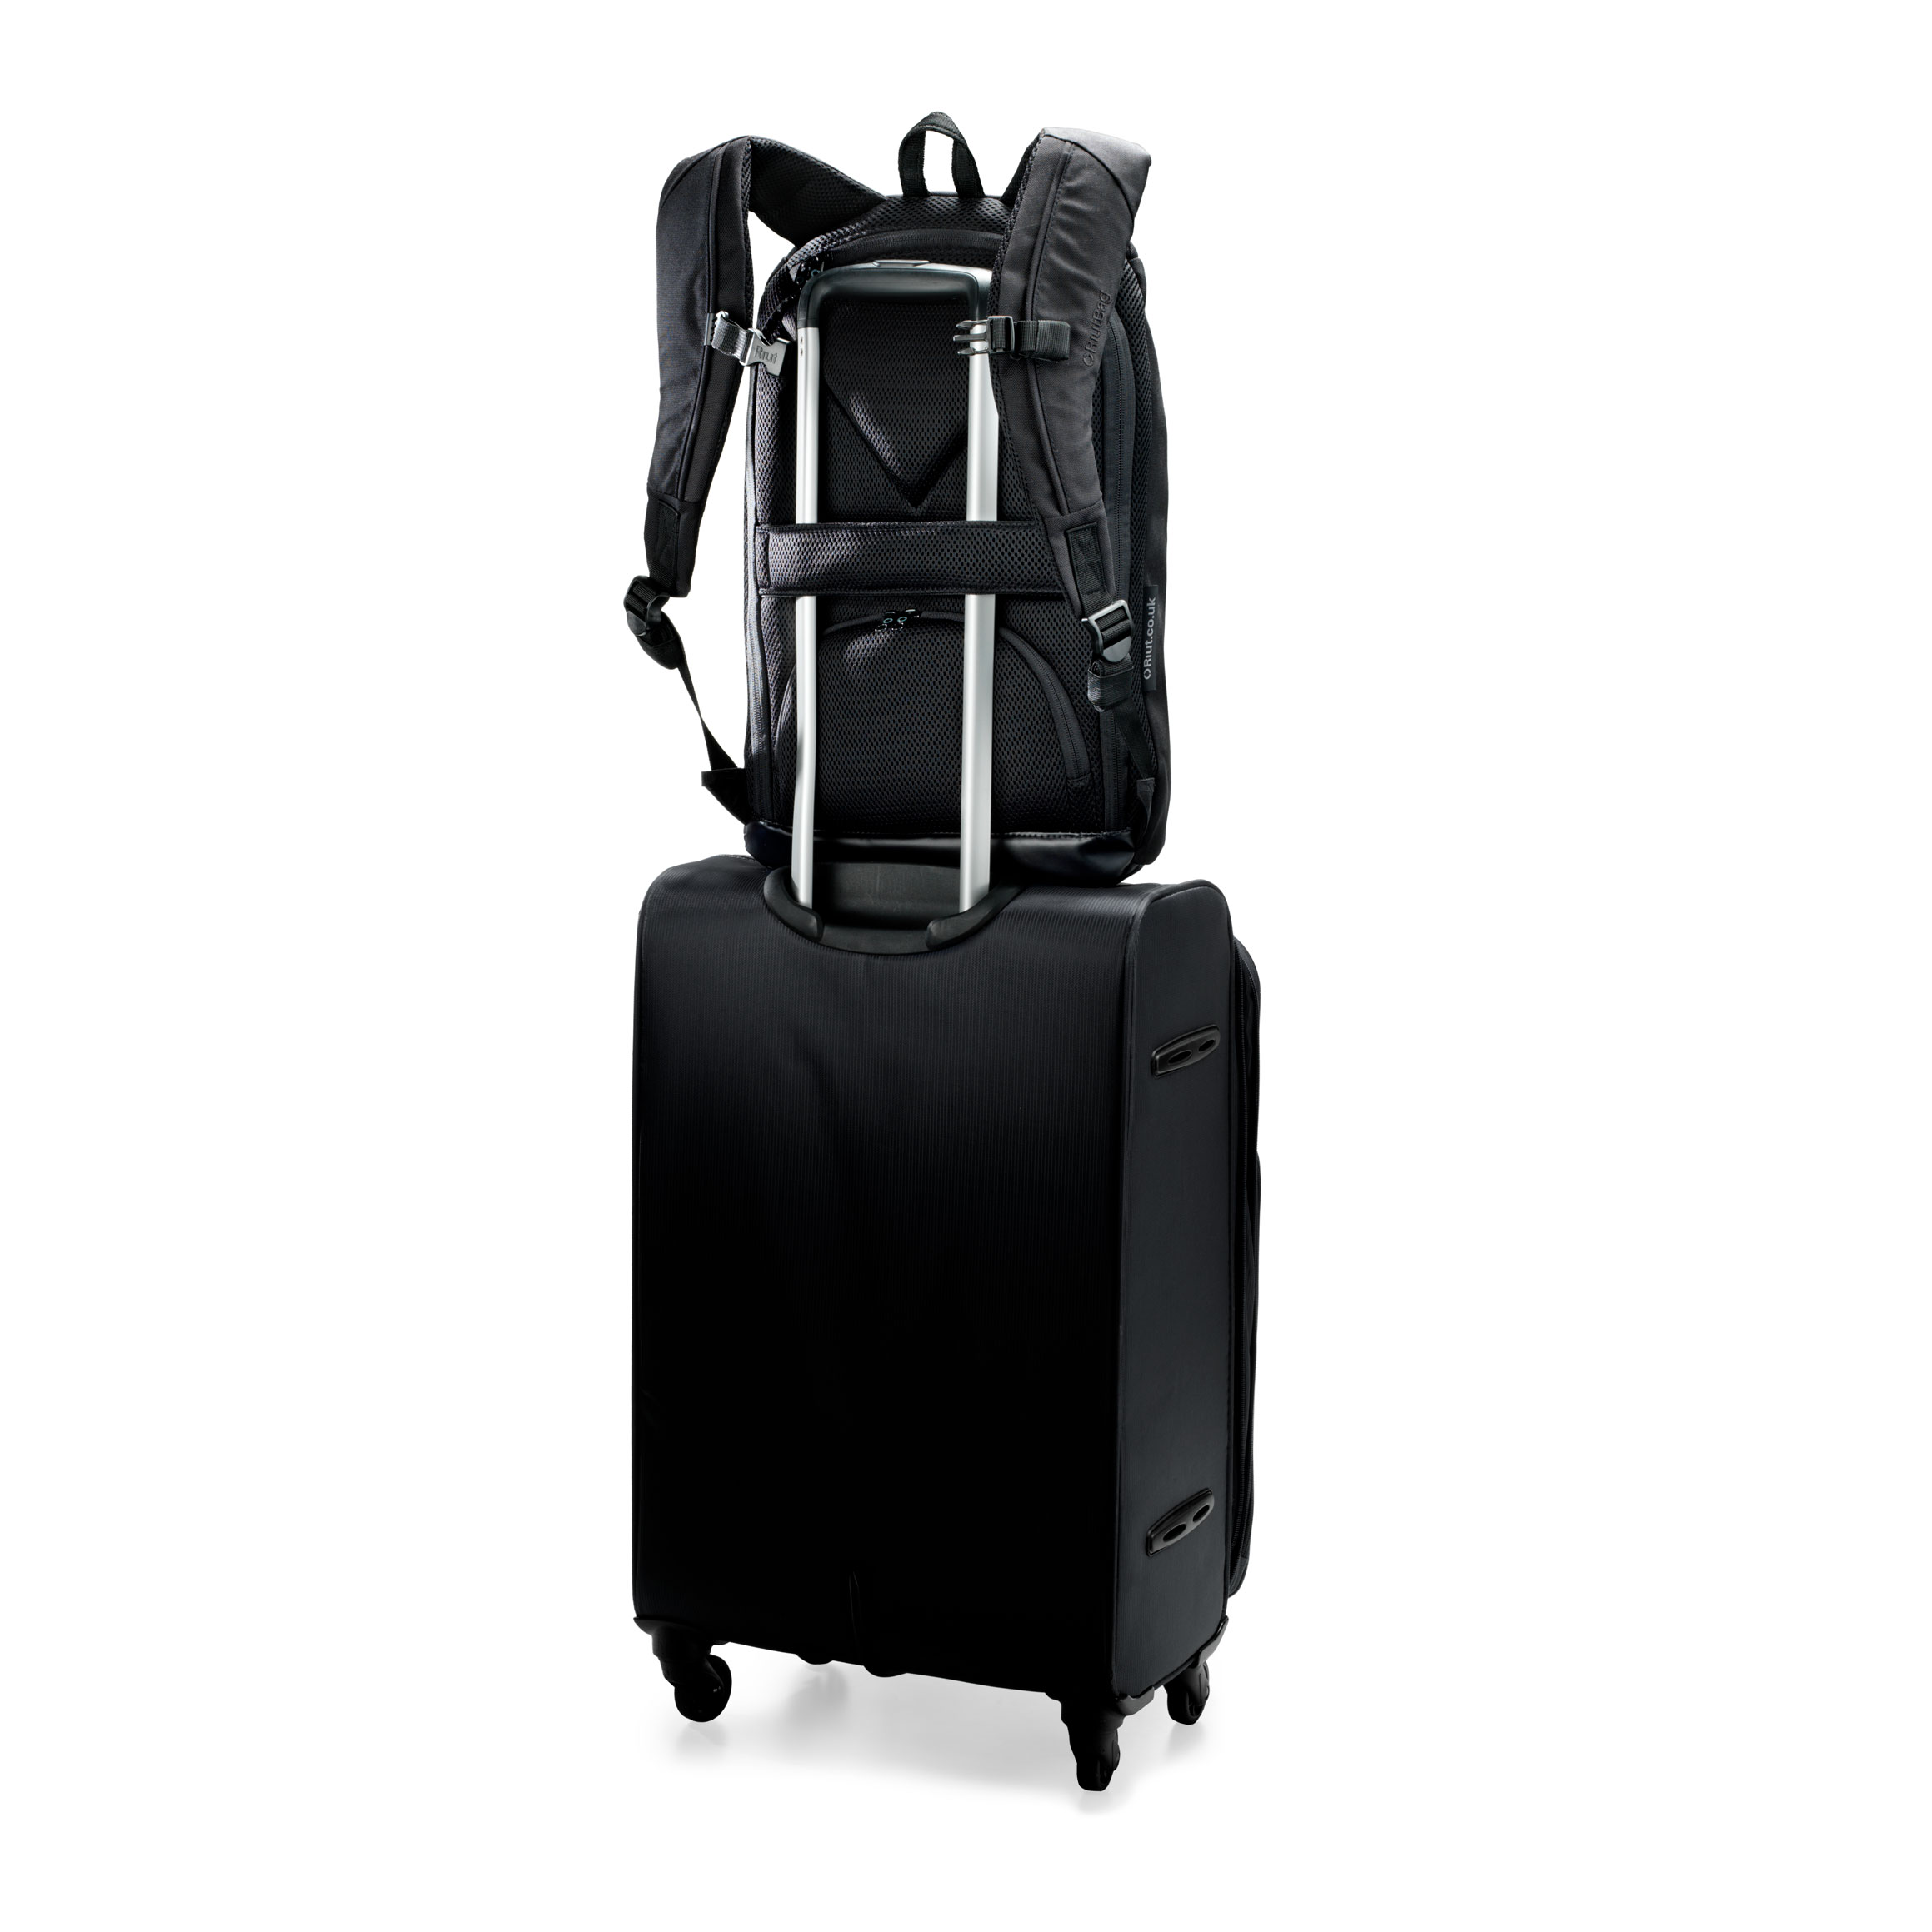 Trolley suitcase strap on the new 2016 RiutBag R10